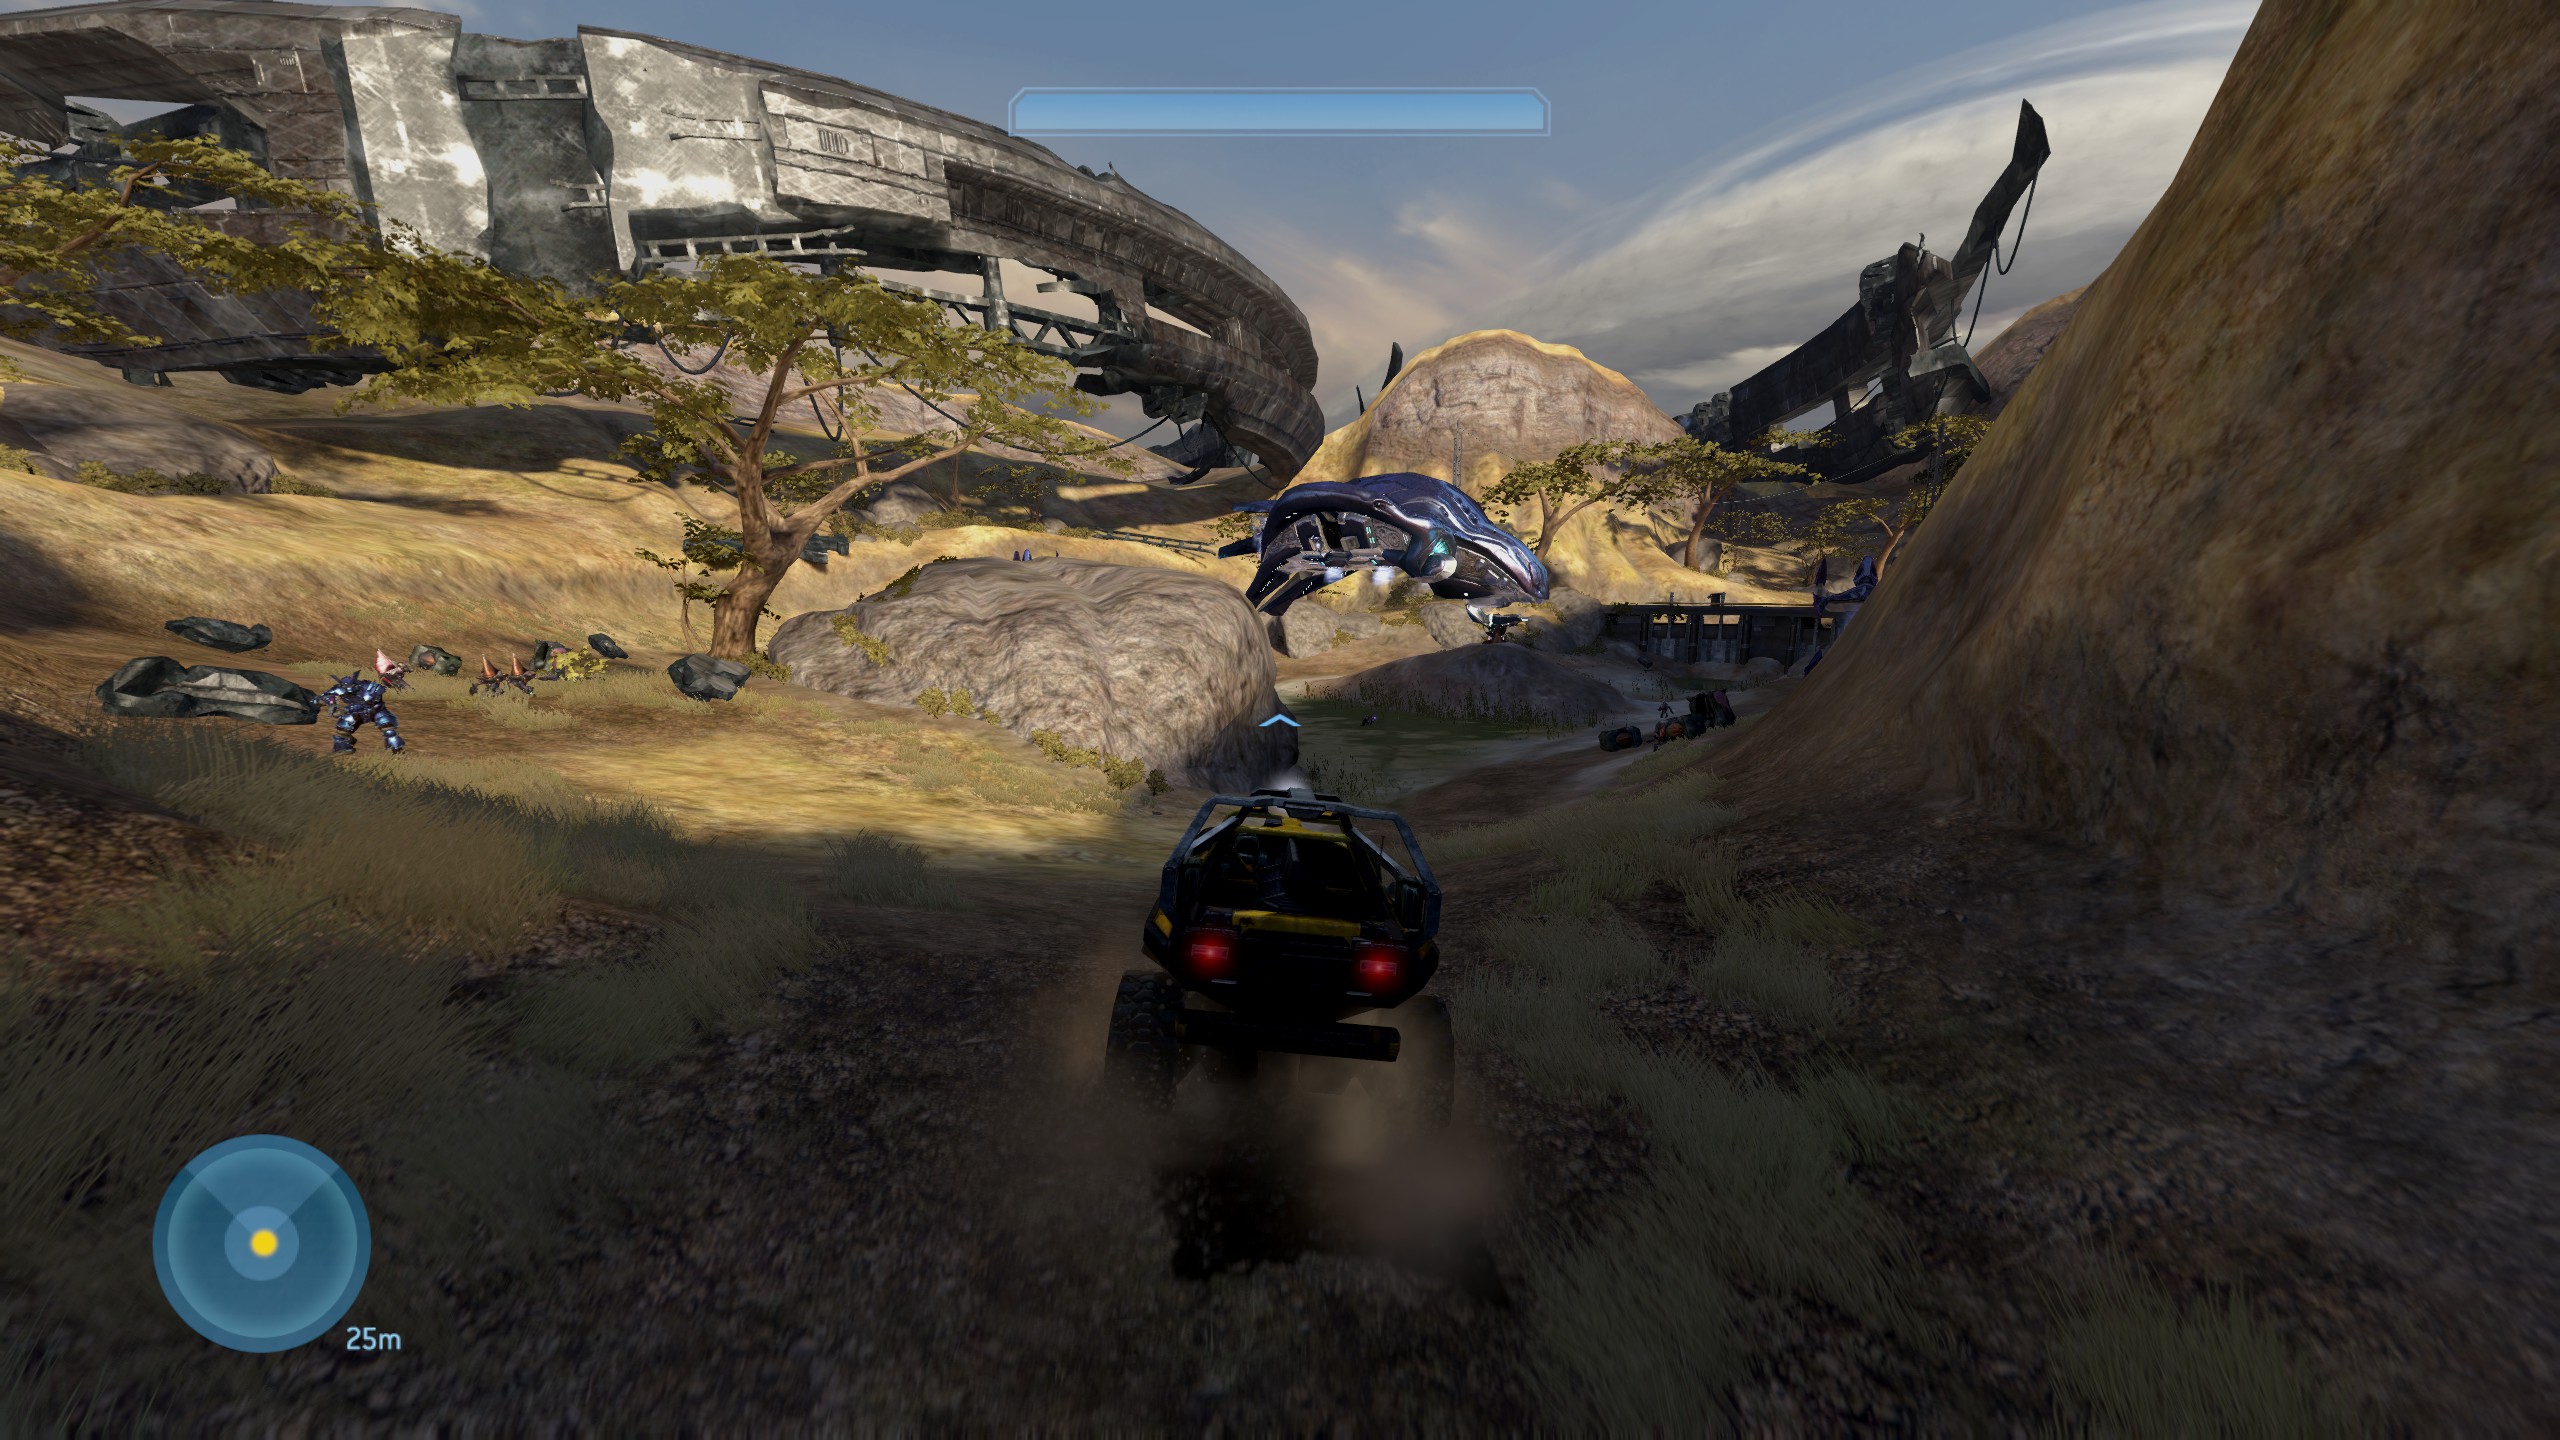 Halo: The Master Chief Collection All Golden Moa Location Tips - Tsavo Highway - A5AF02B